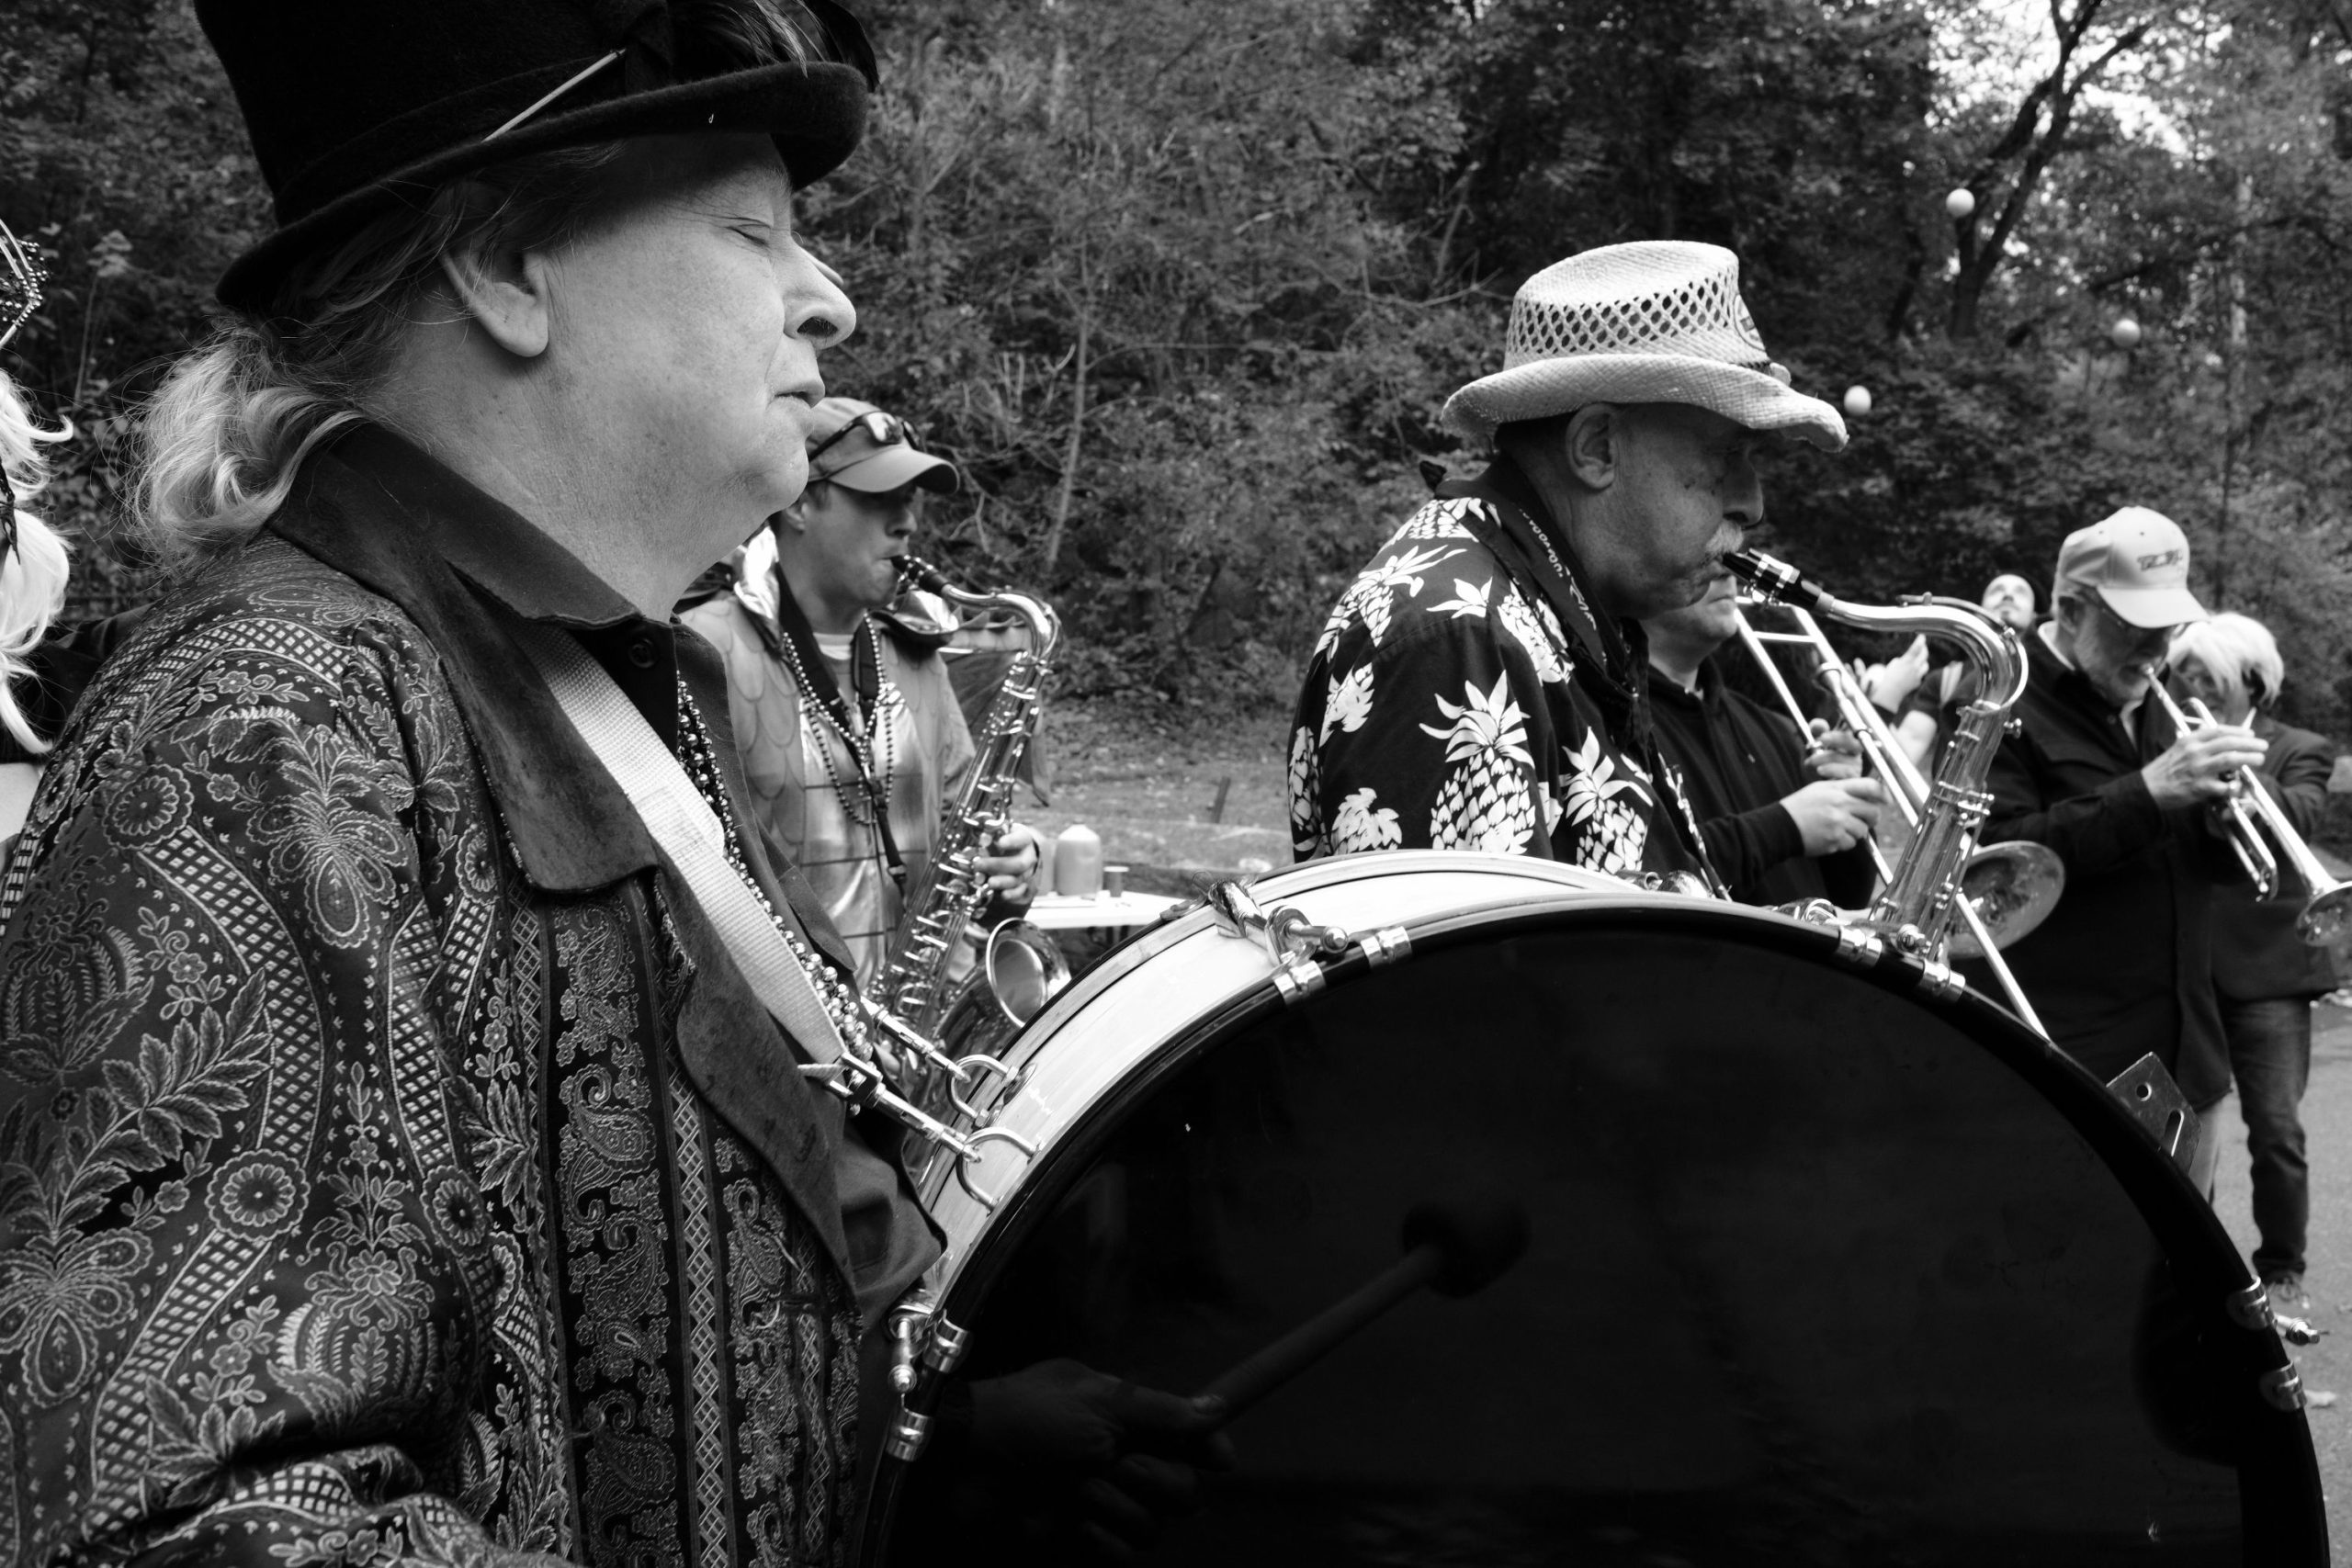 Big Easy Easton Brass musicians perform and walk in costume at the Come As You Art/Arf parade on the Karl Stirner Arts Trail in Easton, Pennsylvania.